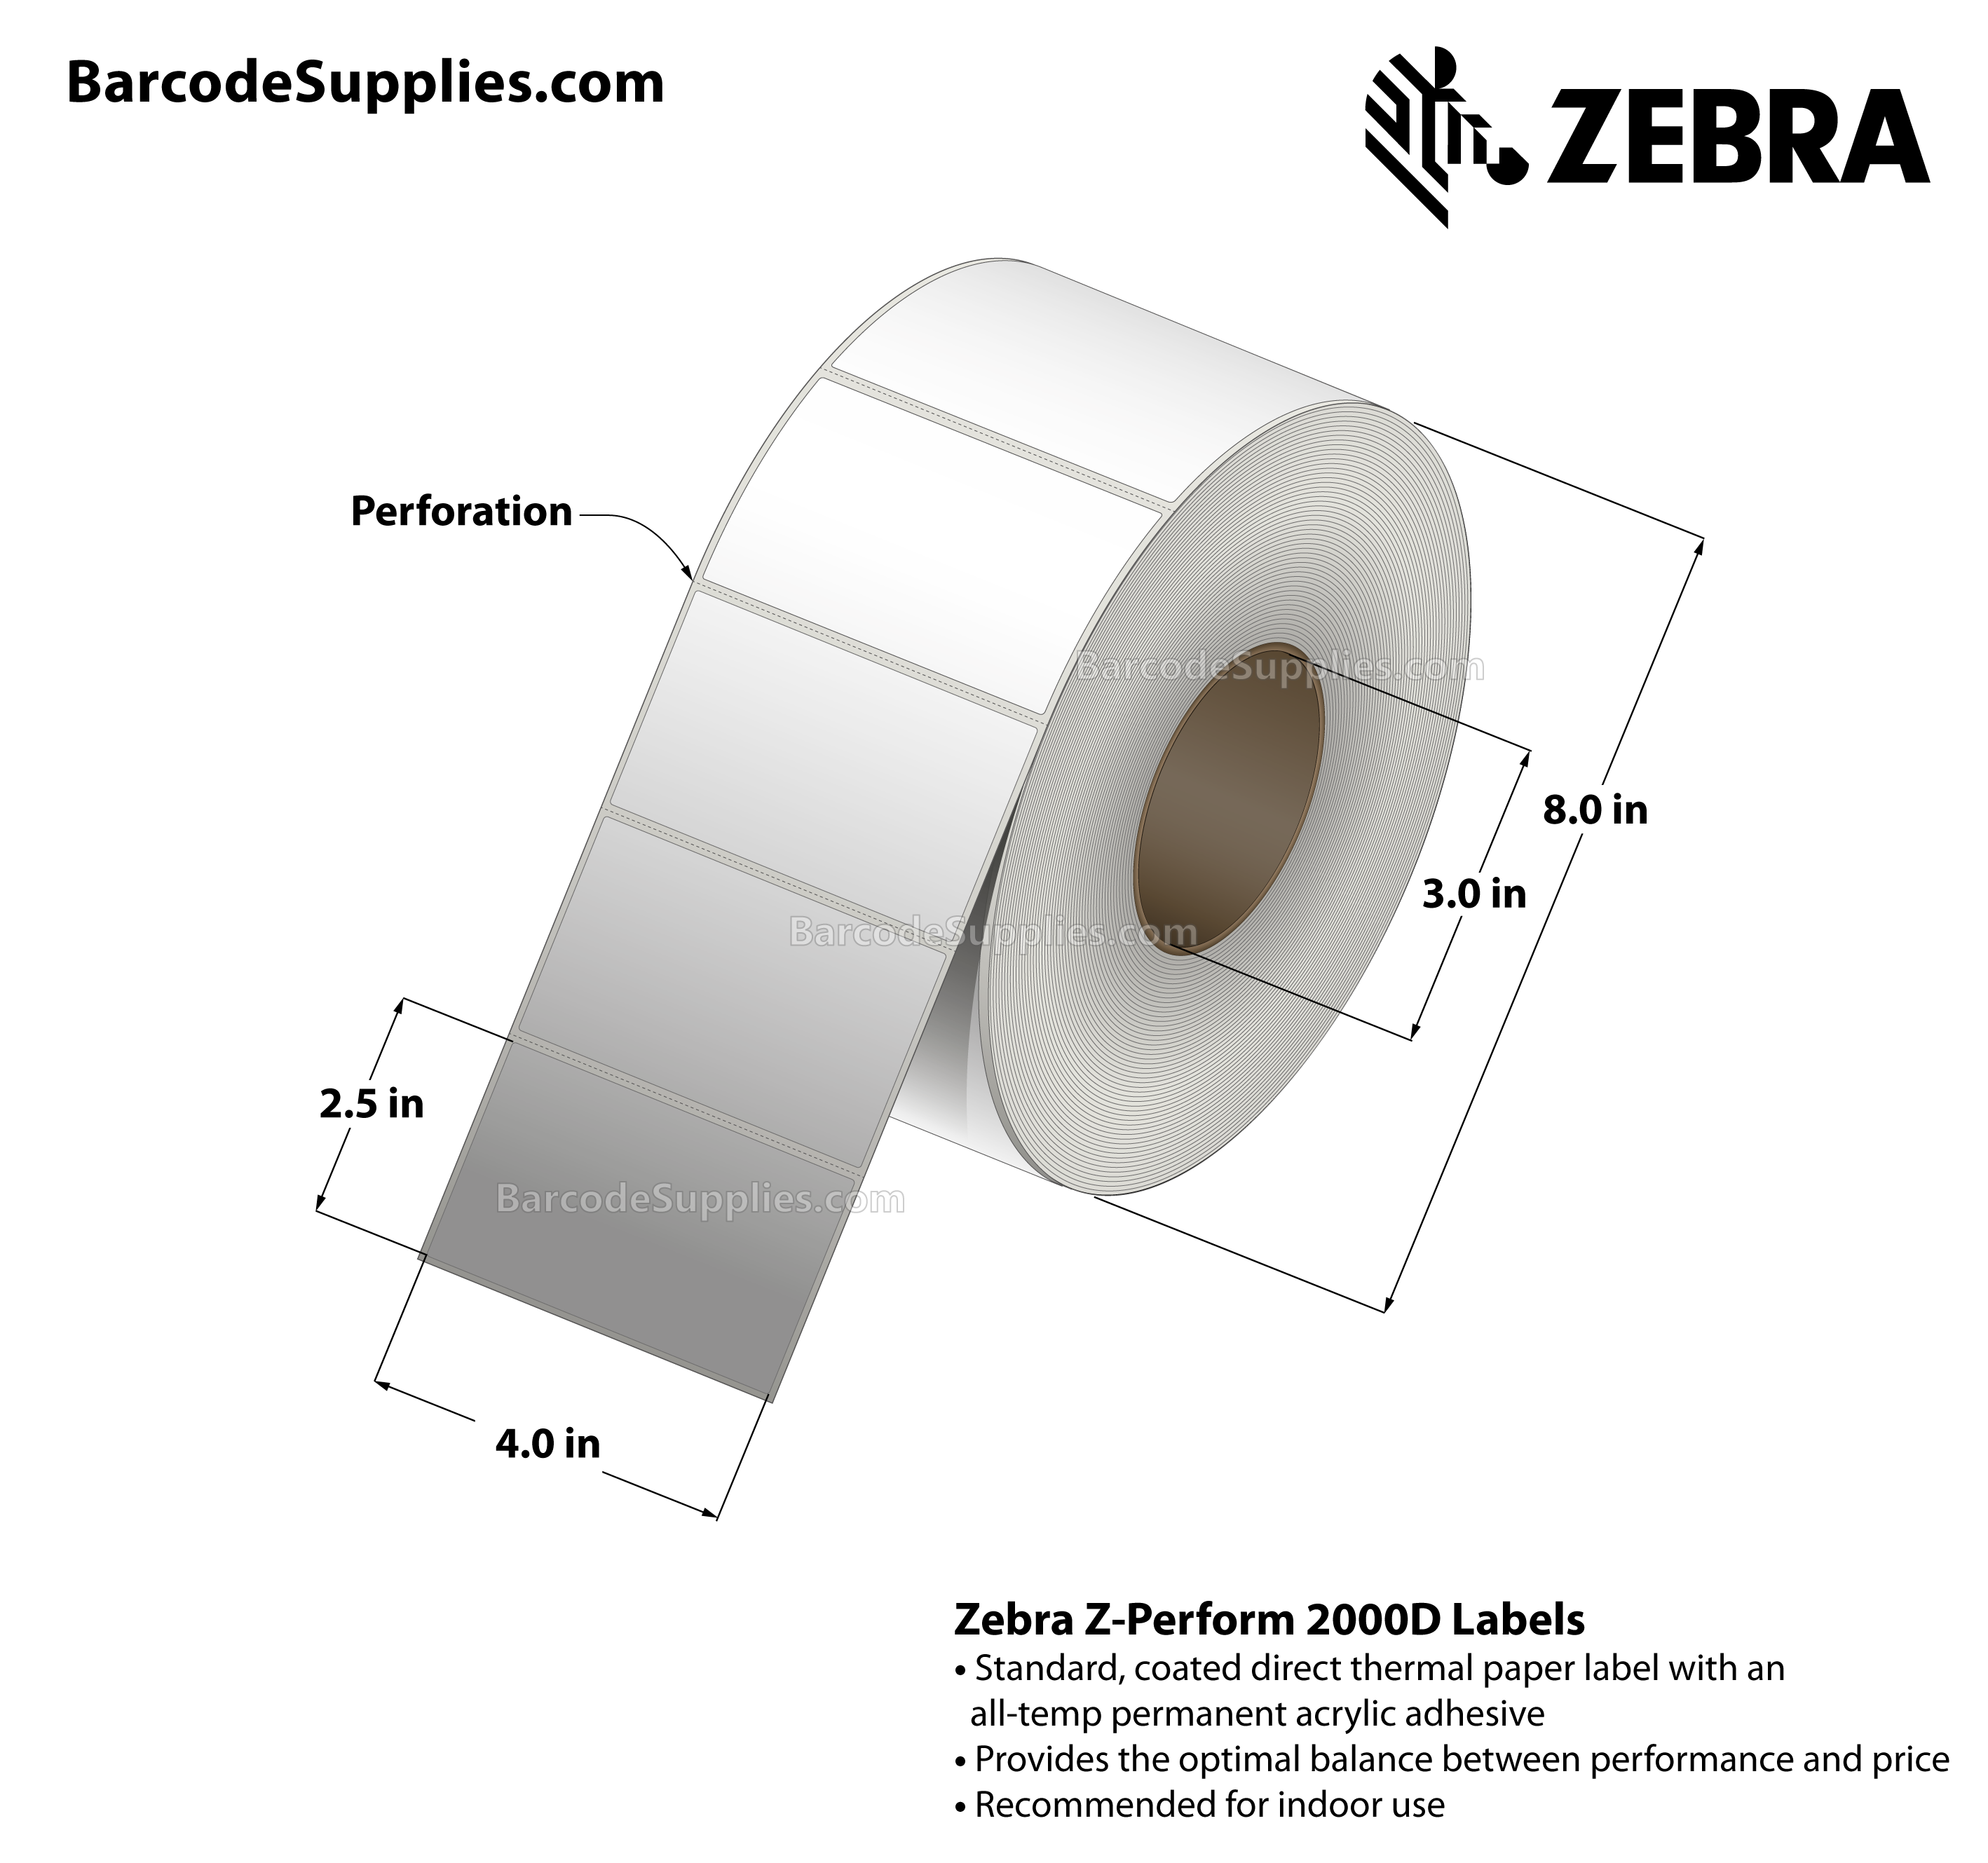 4 x 2.5 Direct Thermal White Z-Perform 2000D Labels With All-Temp Adhesive - Perforated - 2280 Labels Per Roll - Carton Of 4 Rolls - 9120 Labels Total - MPN: 10000294